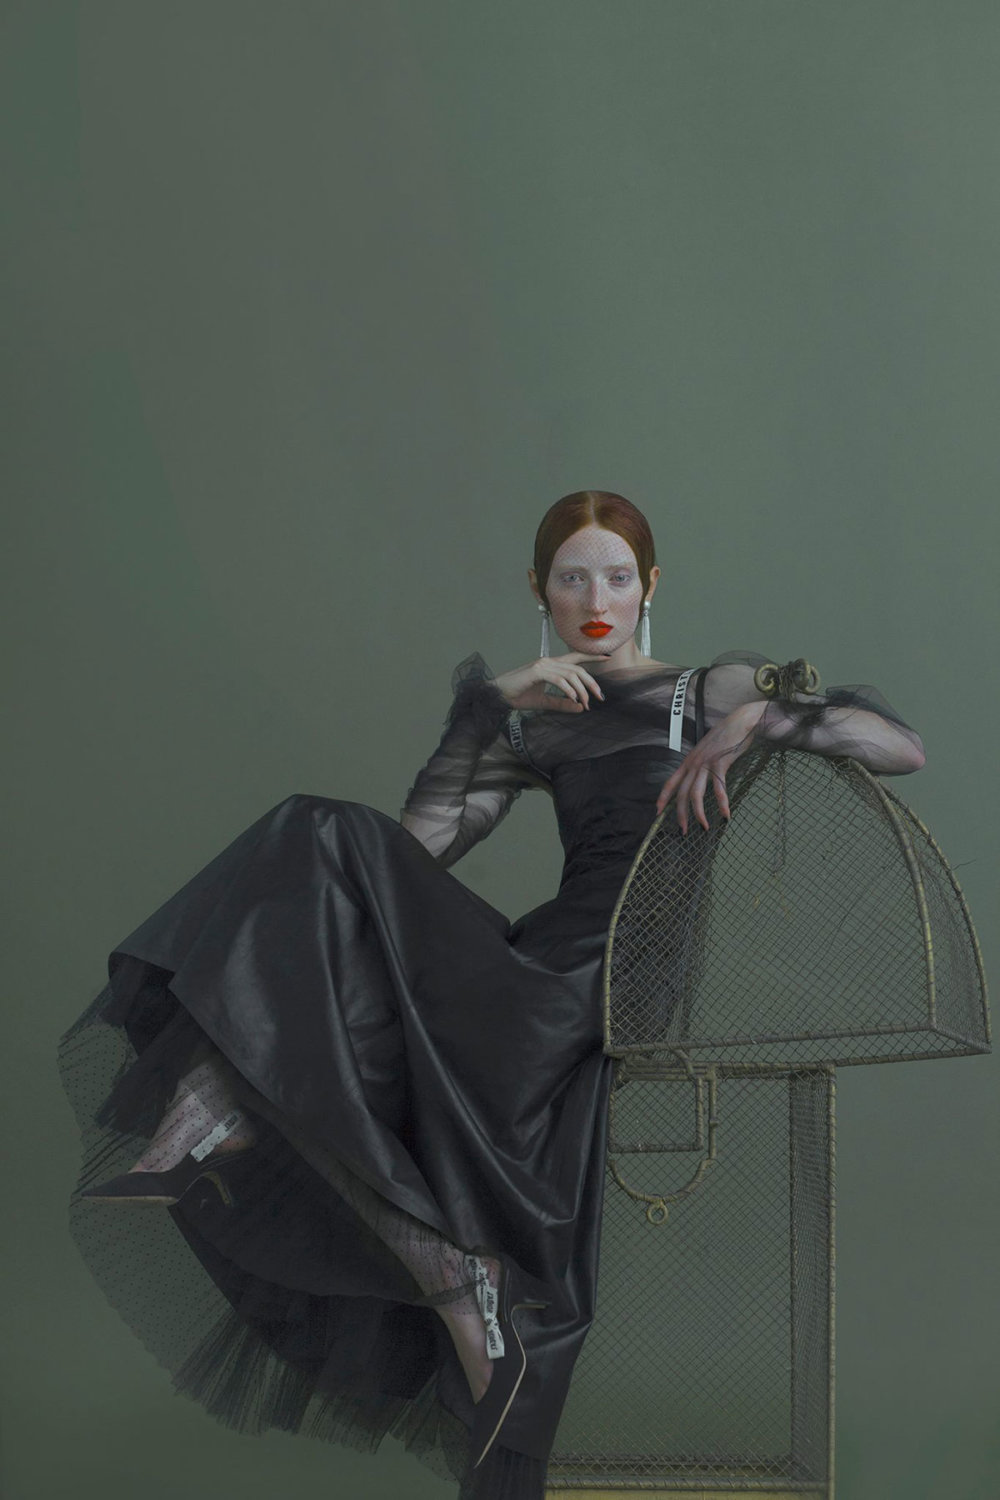 The Marvelously Poetic Editorial And Conceptual Photography Of Evelyn Bencicova 15